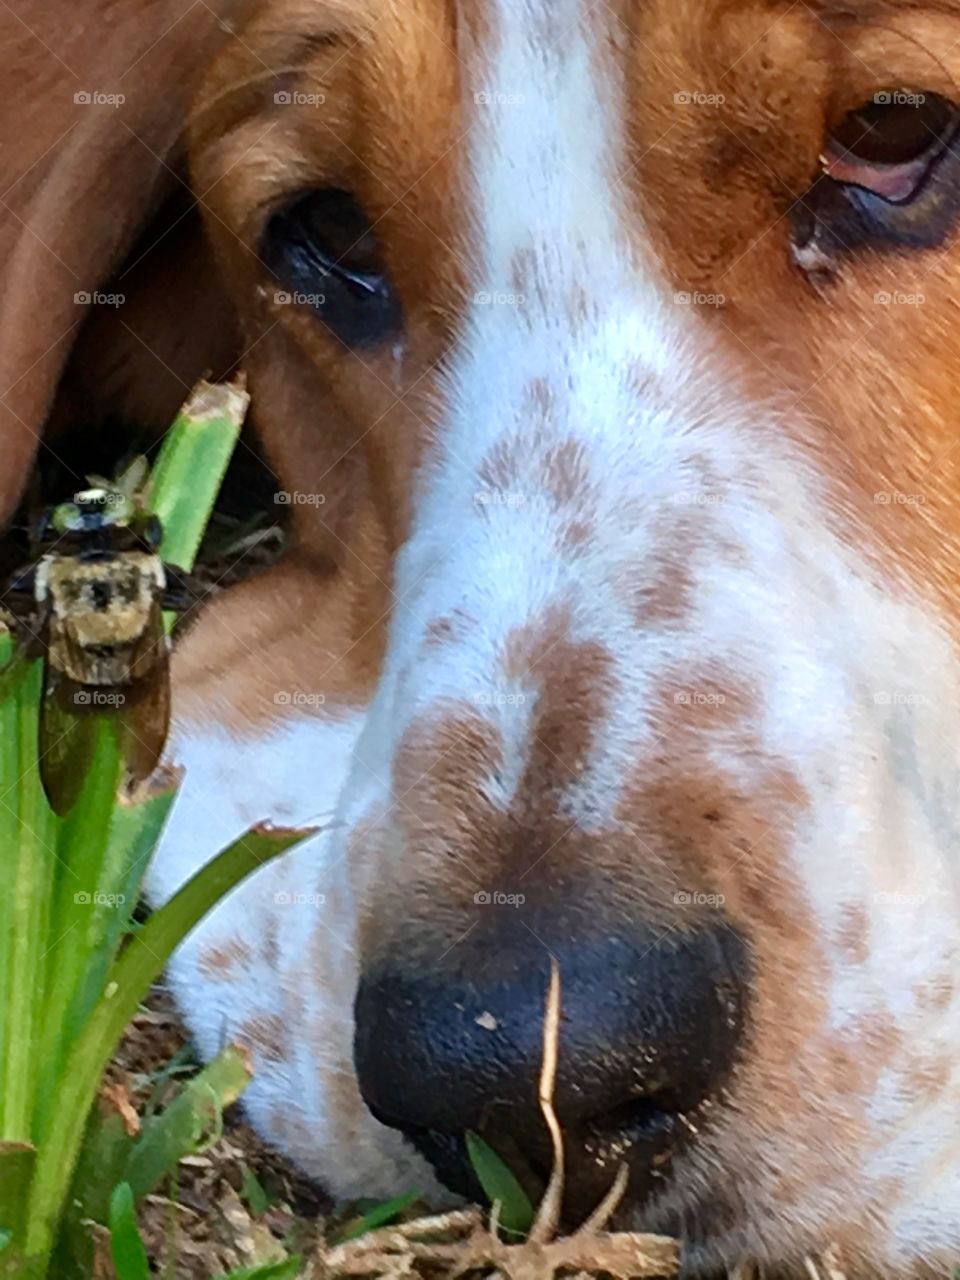 The study of pollination from the Basset perspective means focus and concentration. 